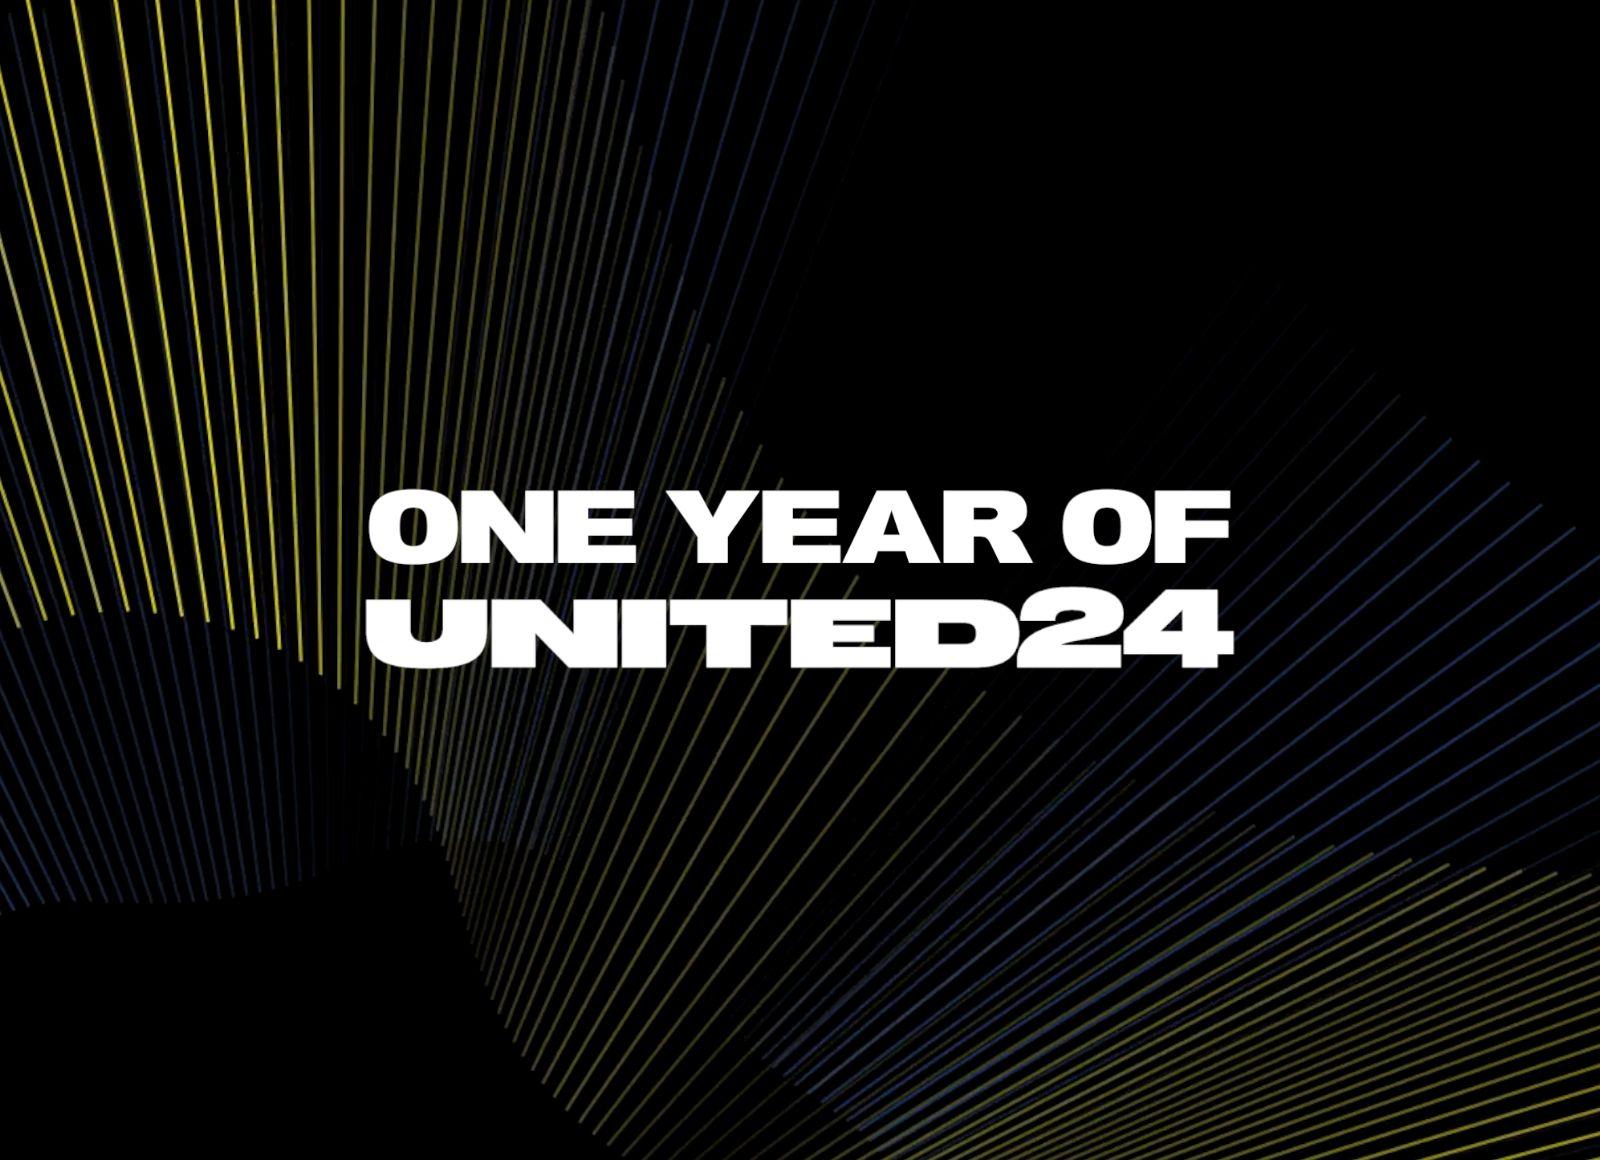 The UNITED24 Fundraising Platform Turns One Year Old: Key Results and Fundraisers